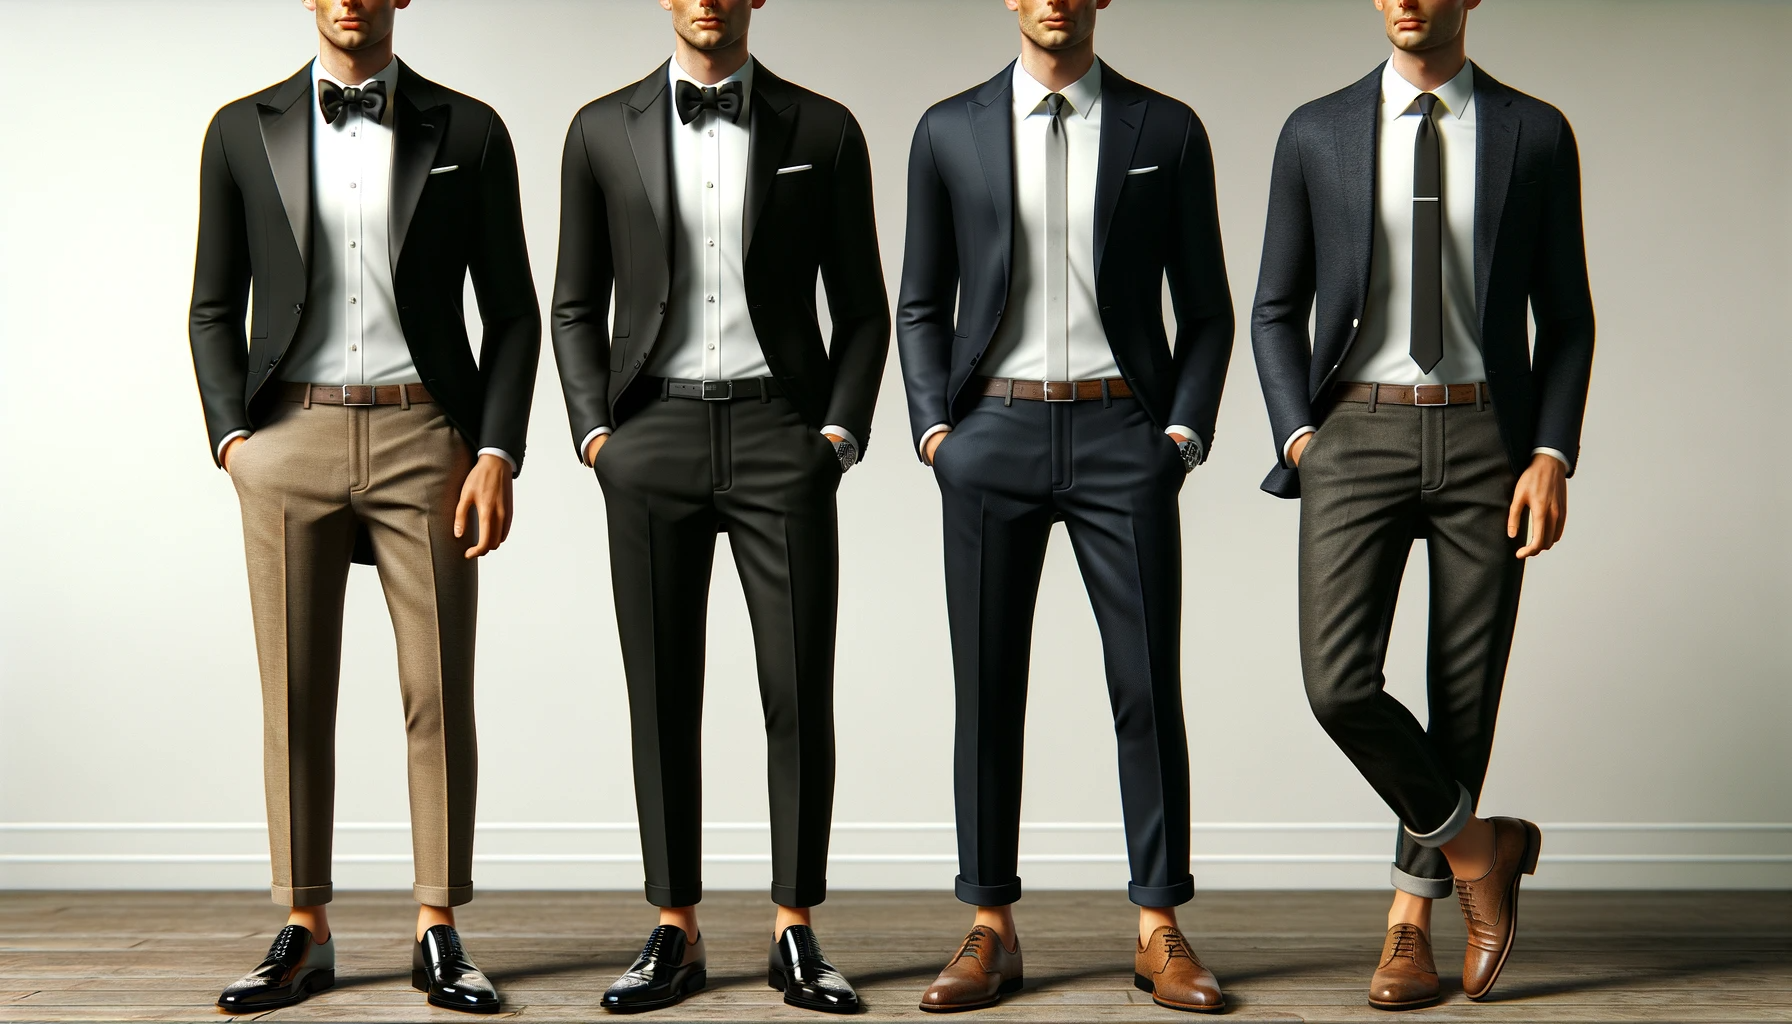 Professional Wear vs. Formal Attire: What's the Difference?, by BlamGlam